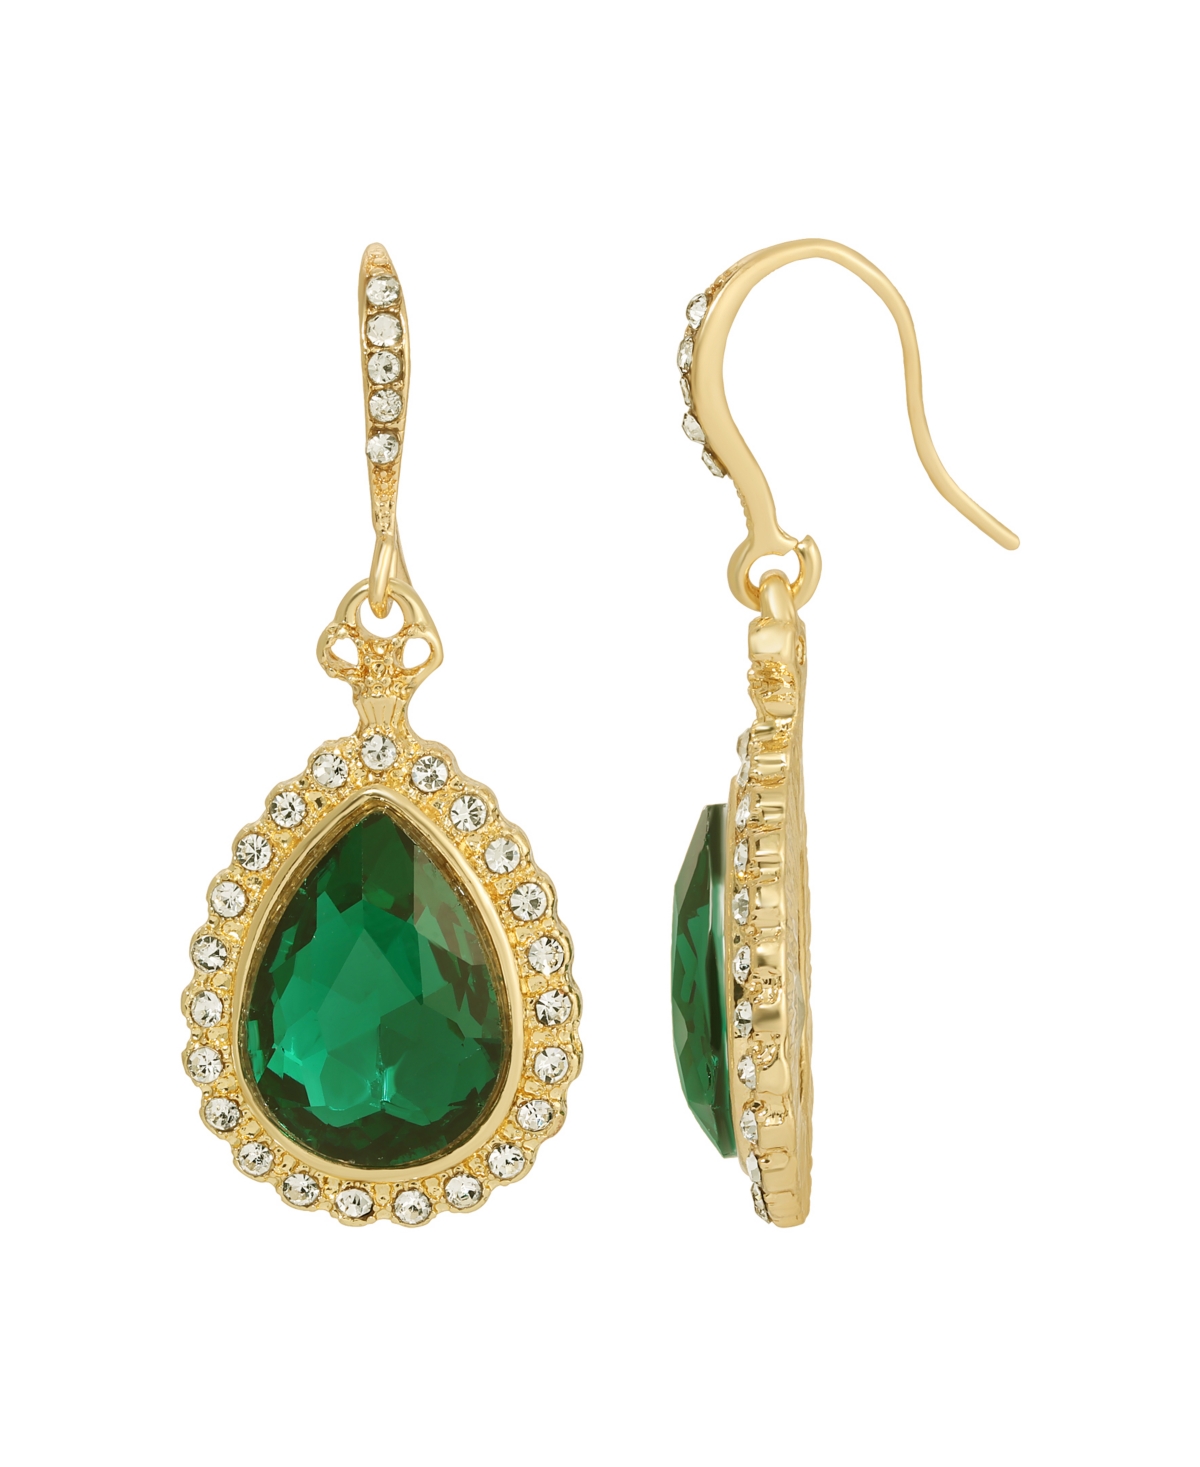 Victorian Jewelry Rings, Earrings, Necklaces, Hair Jewelry 2028 Gold-Tone Teardrop Earrings - Green $22.40 AT vintagedancer.com